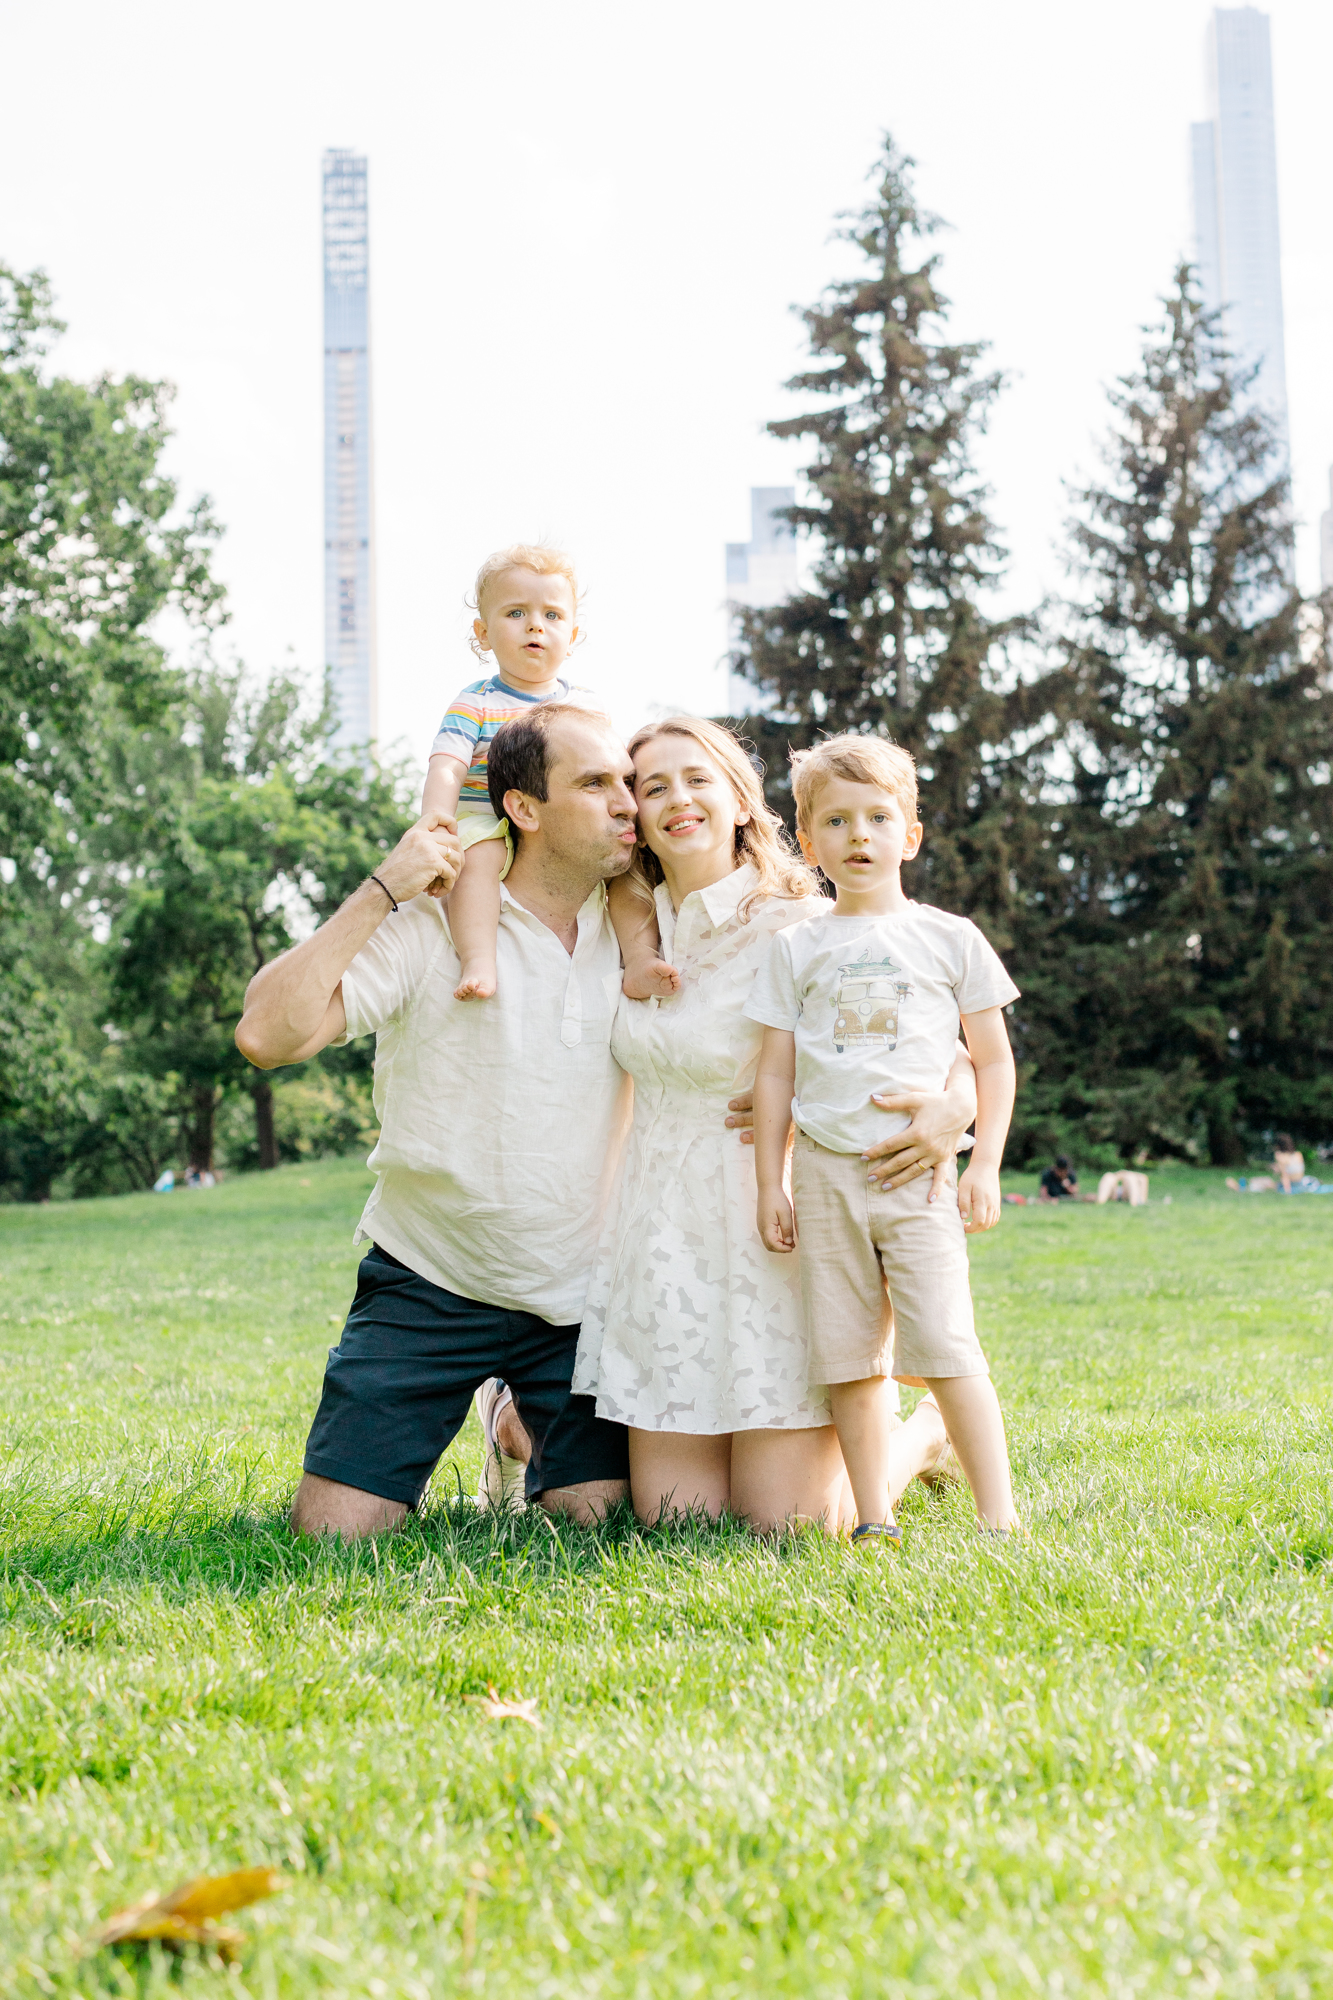 Lovely Family Photos in Central Park